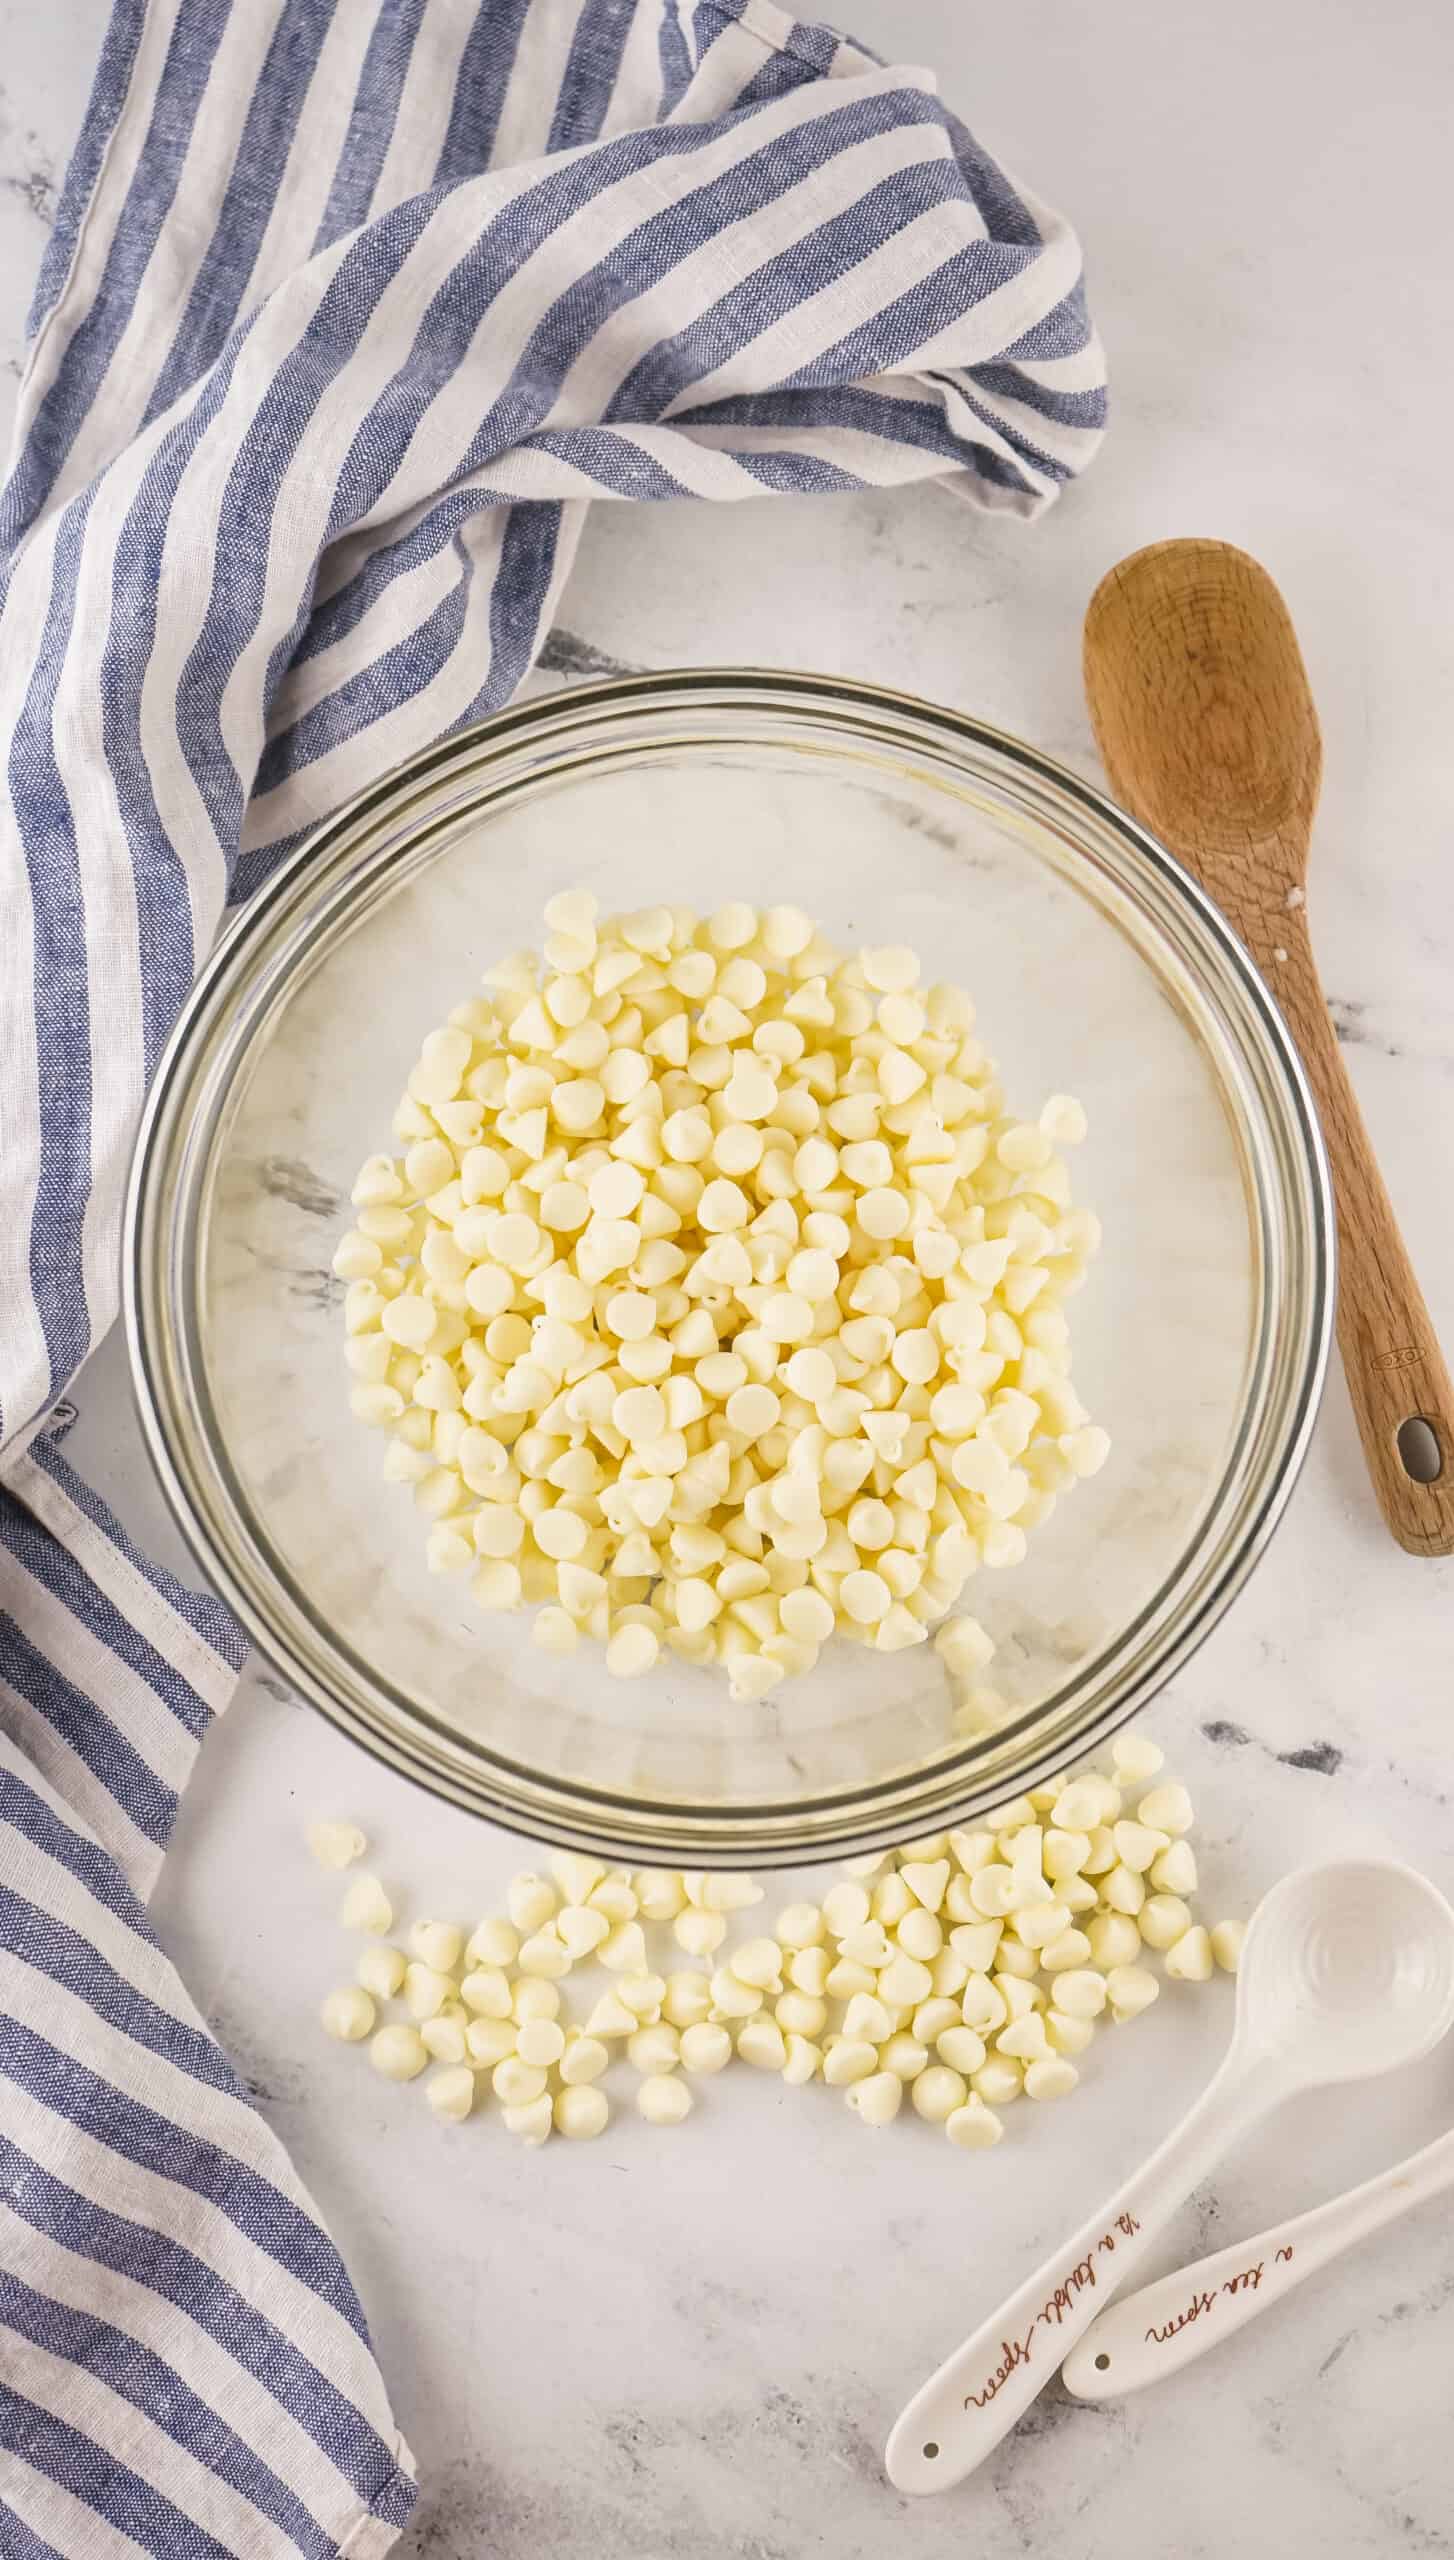 white chocolate chips in a glass bowl ready to melt in the microwave